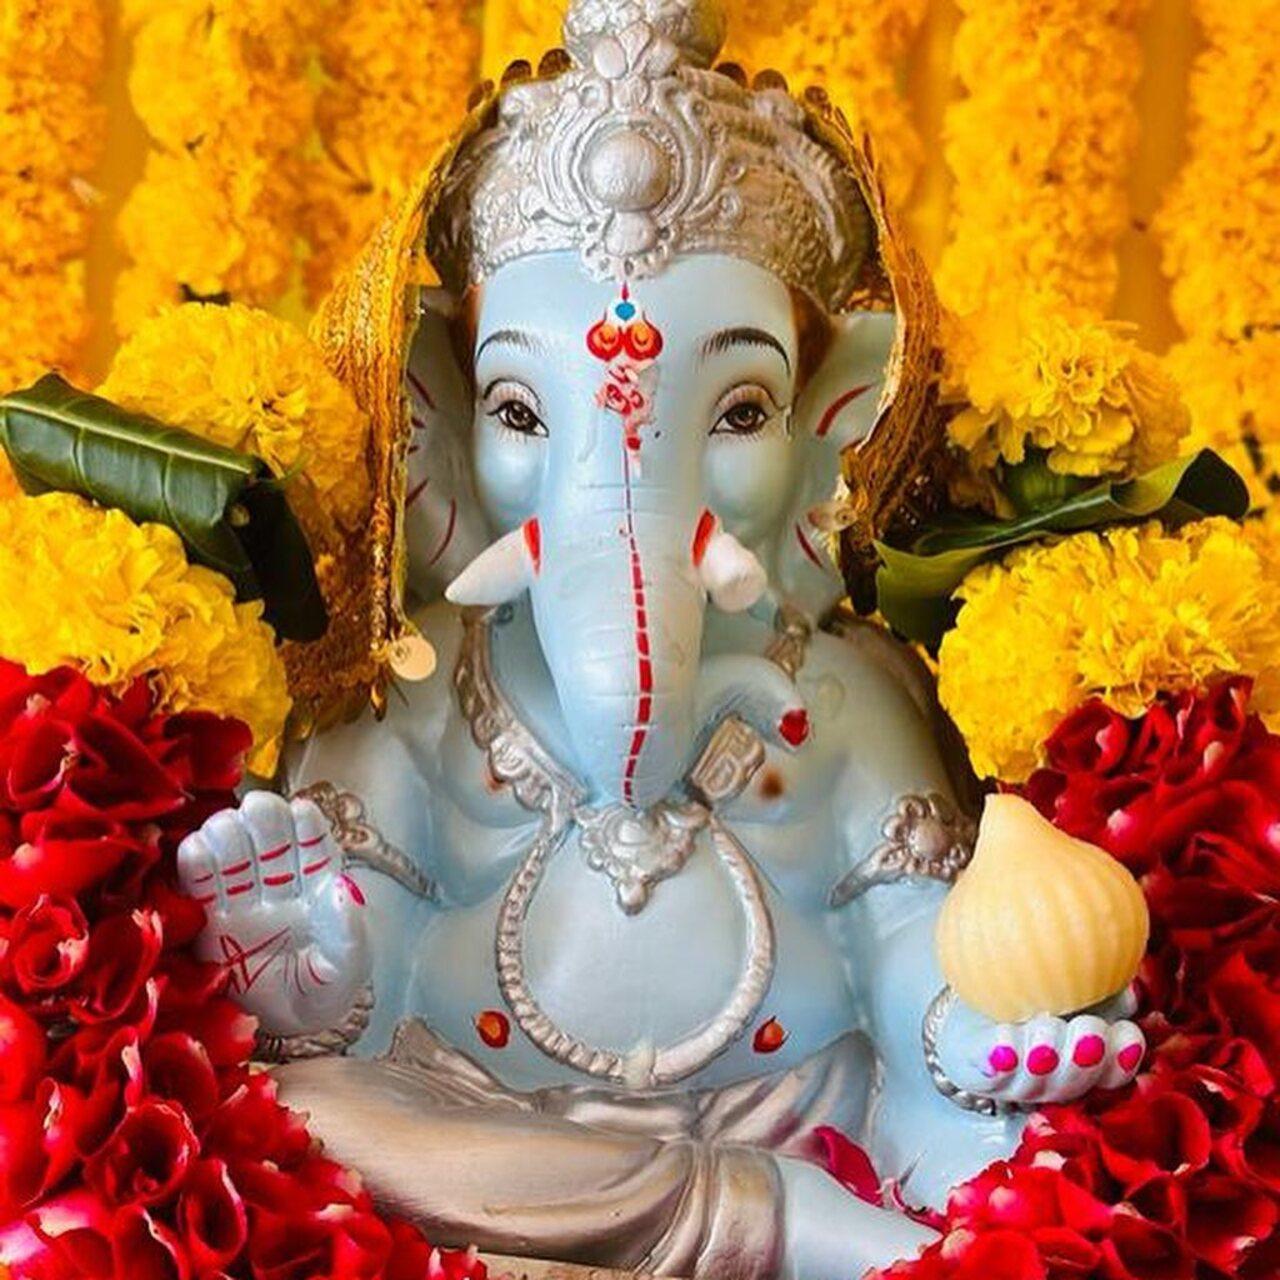 Ananya also shared a close up picture of the Ganpati idol at their Mumbai home